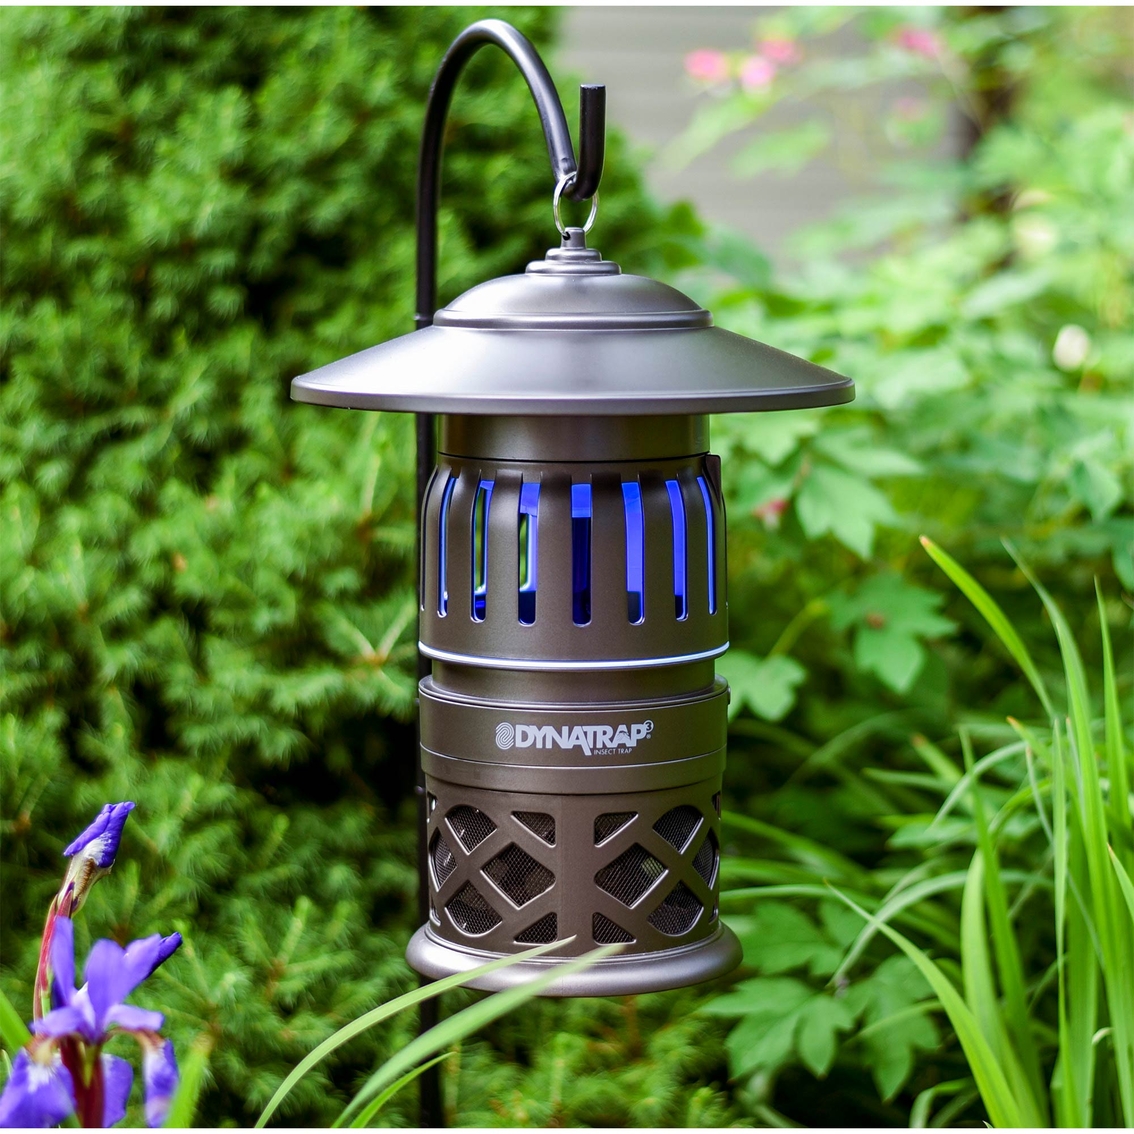 DynaTrap 1/2 Acre Decora Mosquito and Insect Trap - Image 3 of 3